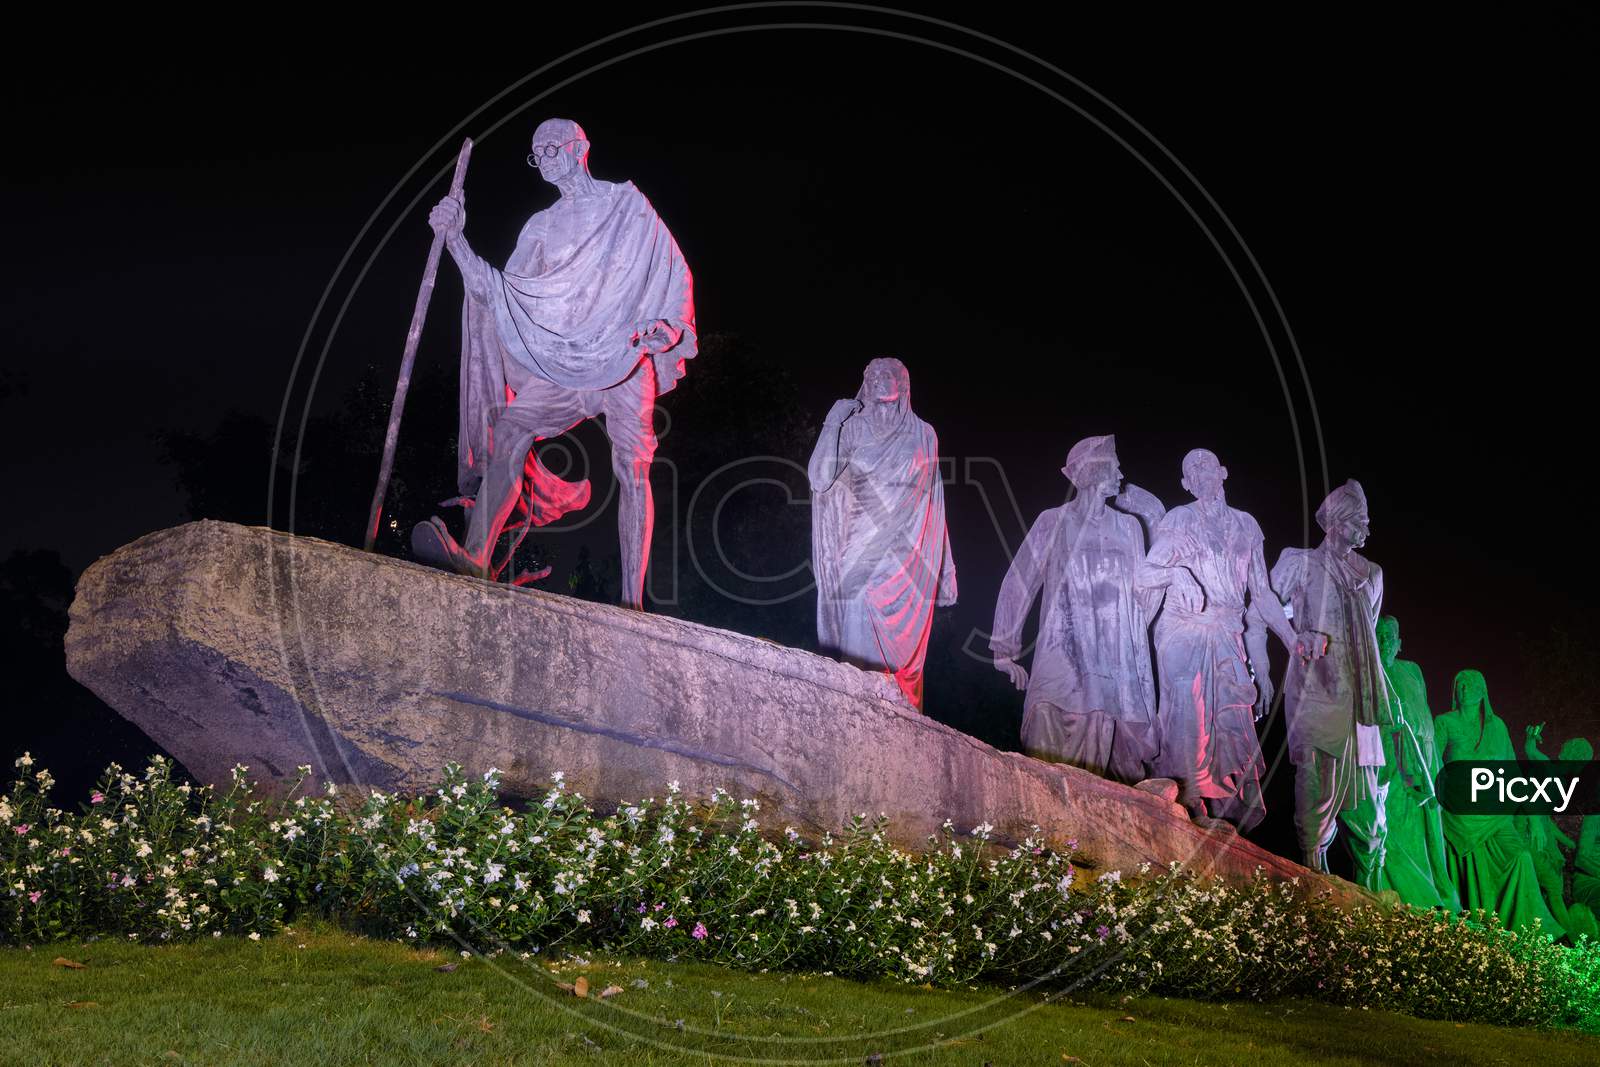 Dandi March Statue Illuminated At Night, Commemorating The Salt March Of 1930, With Gandhi And His Followers In Peaceful Protest In New Delhi, India